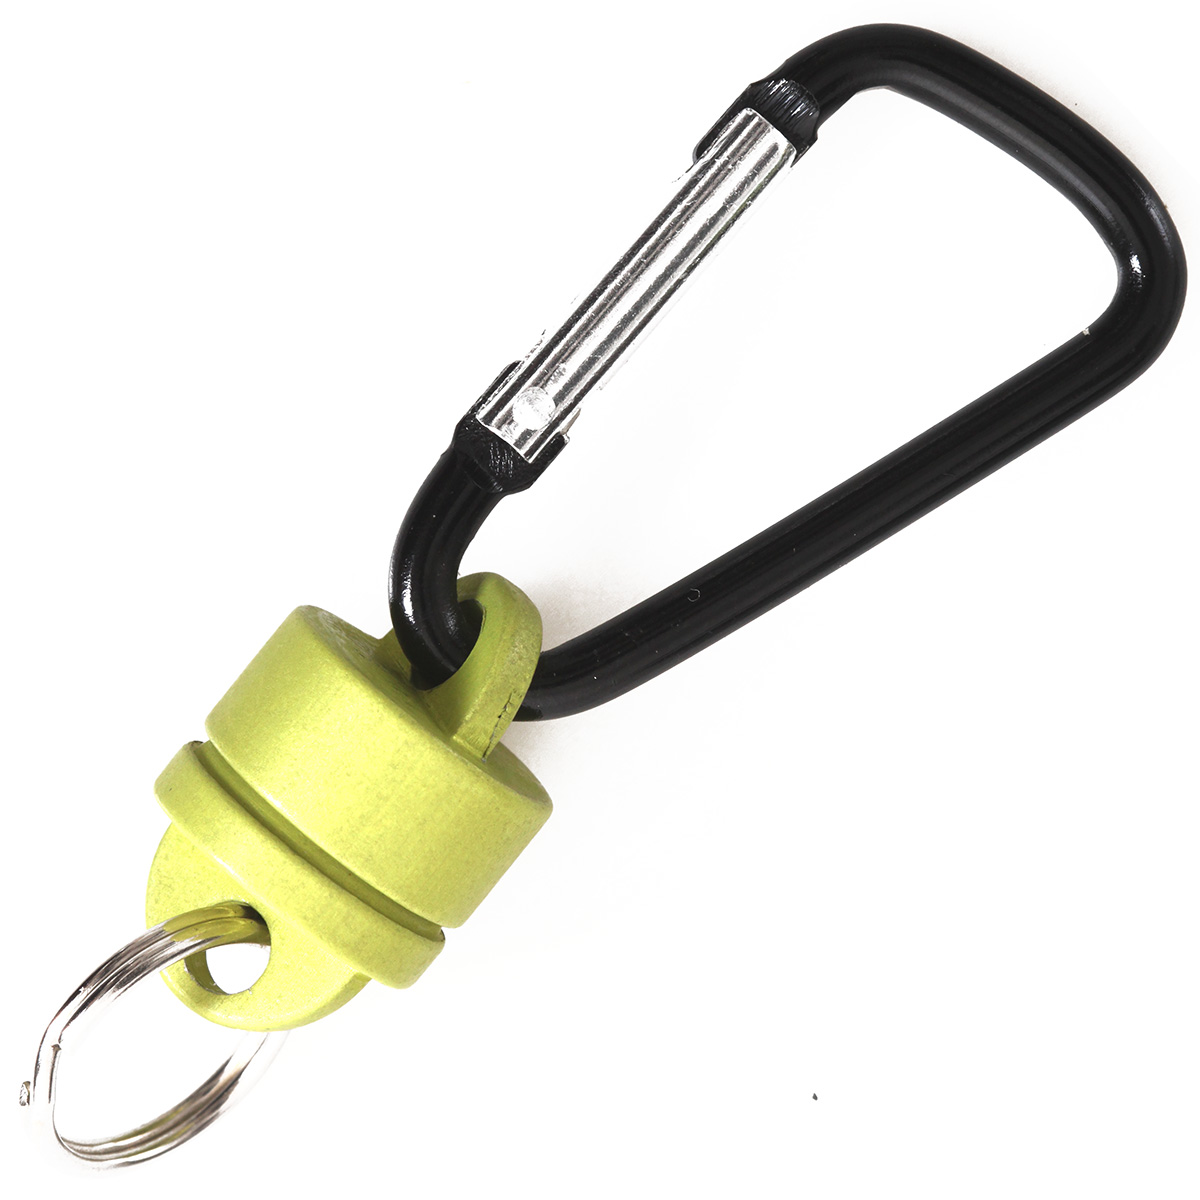 Maximumcatch Fly Fishing Magnetic Net Release & Catch Net Holder  Strength1.2-3.5KG with Strong Cord Fishing Accessory